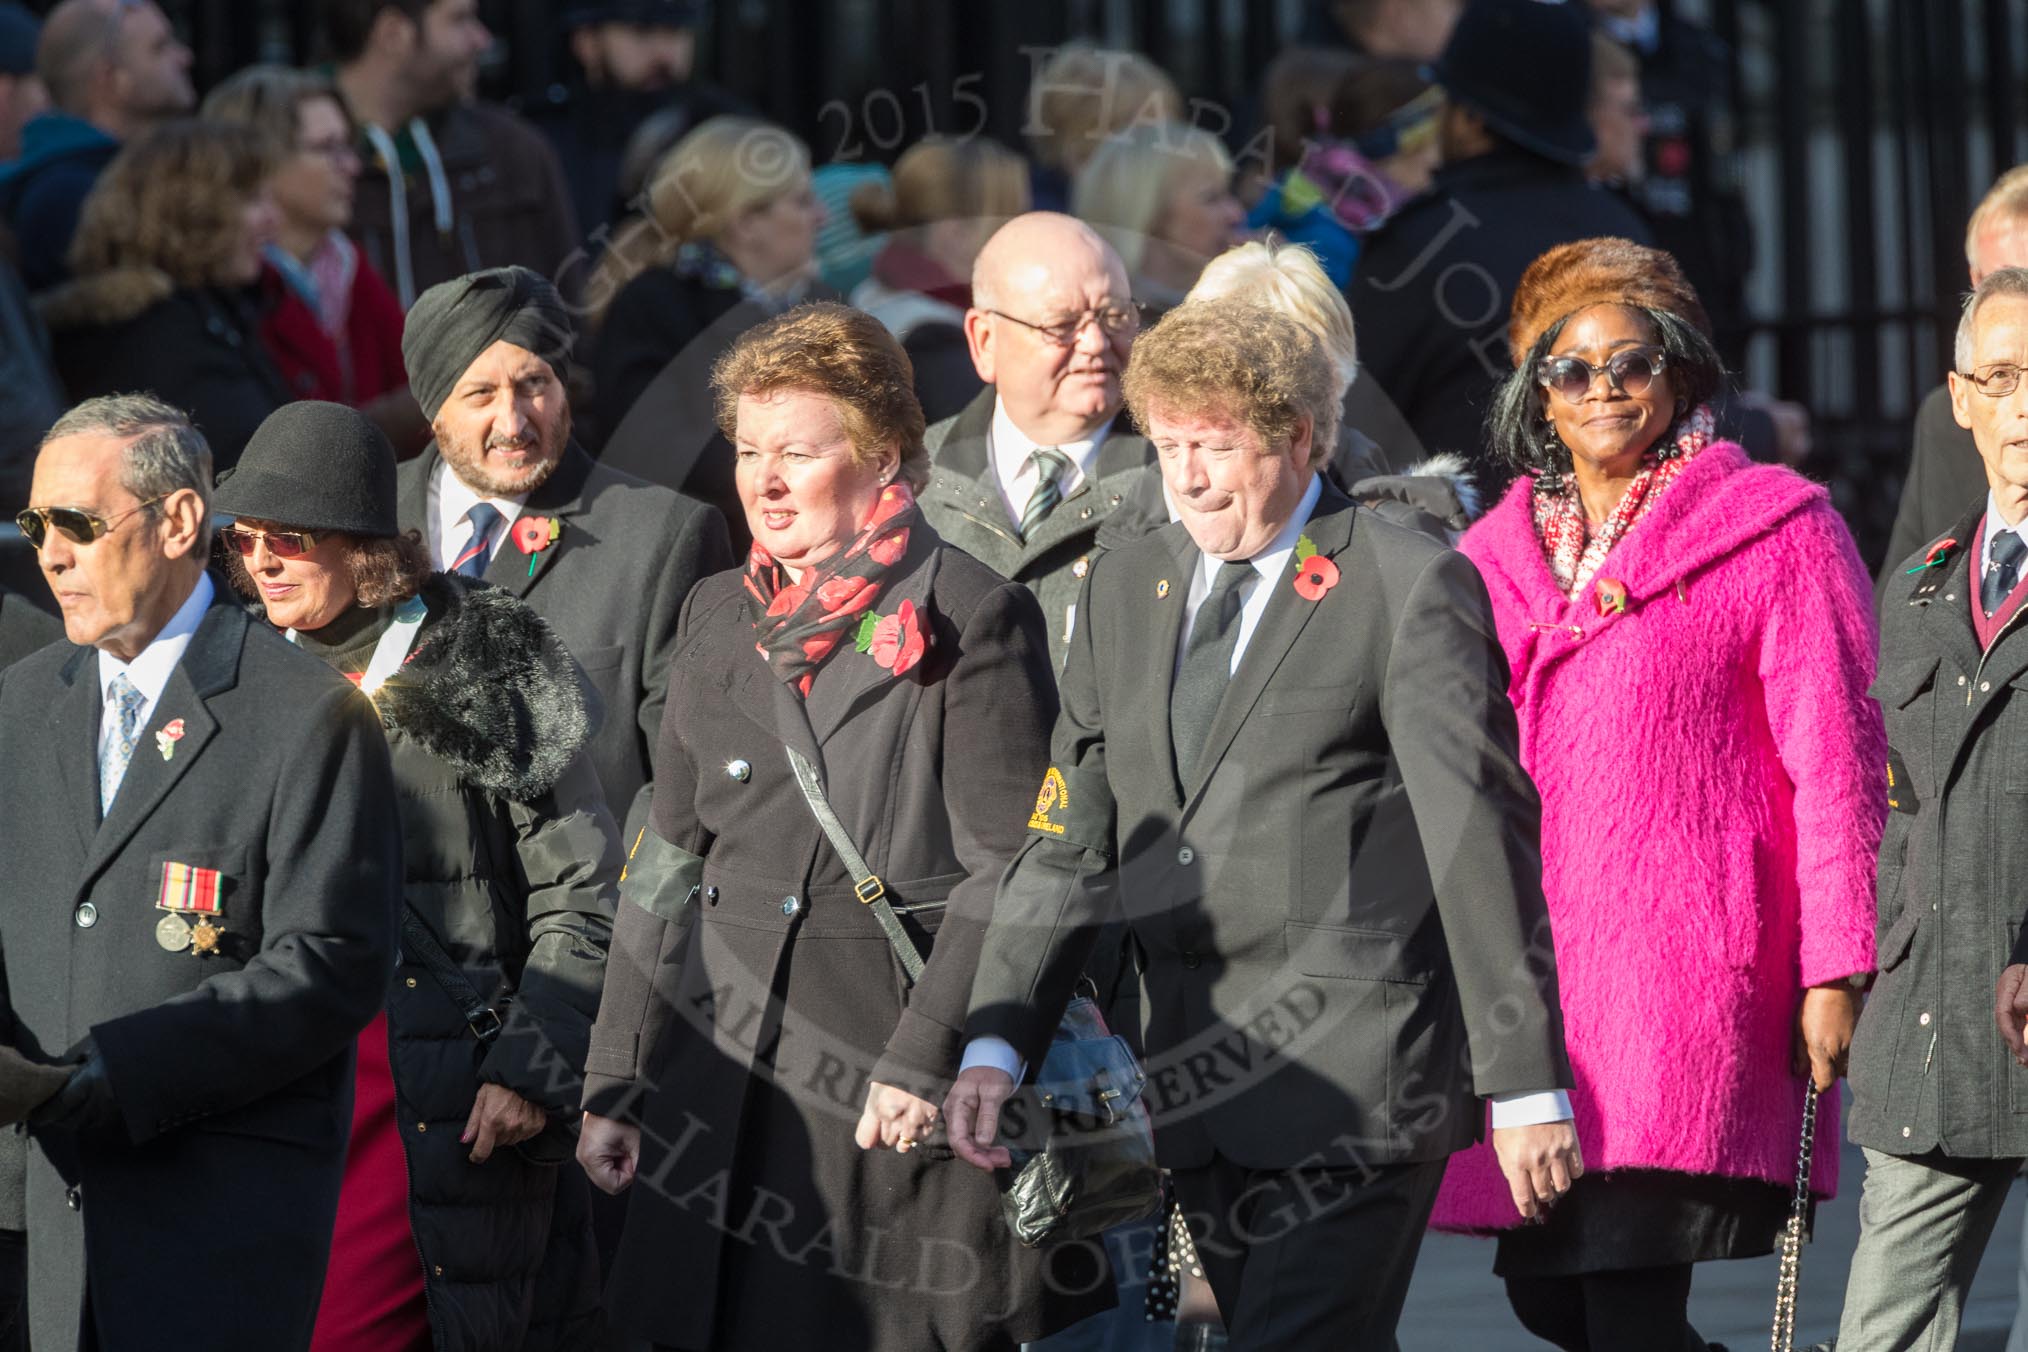 March Past, Remembrance Sunday at the Cenotaph 2016: M28 Lions Club International.
Cenotaph, Whitehall, London SW1,
London,
Greater London,
United Kingdom,
on 13 November 2016 at 13:17, image #2742